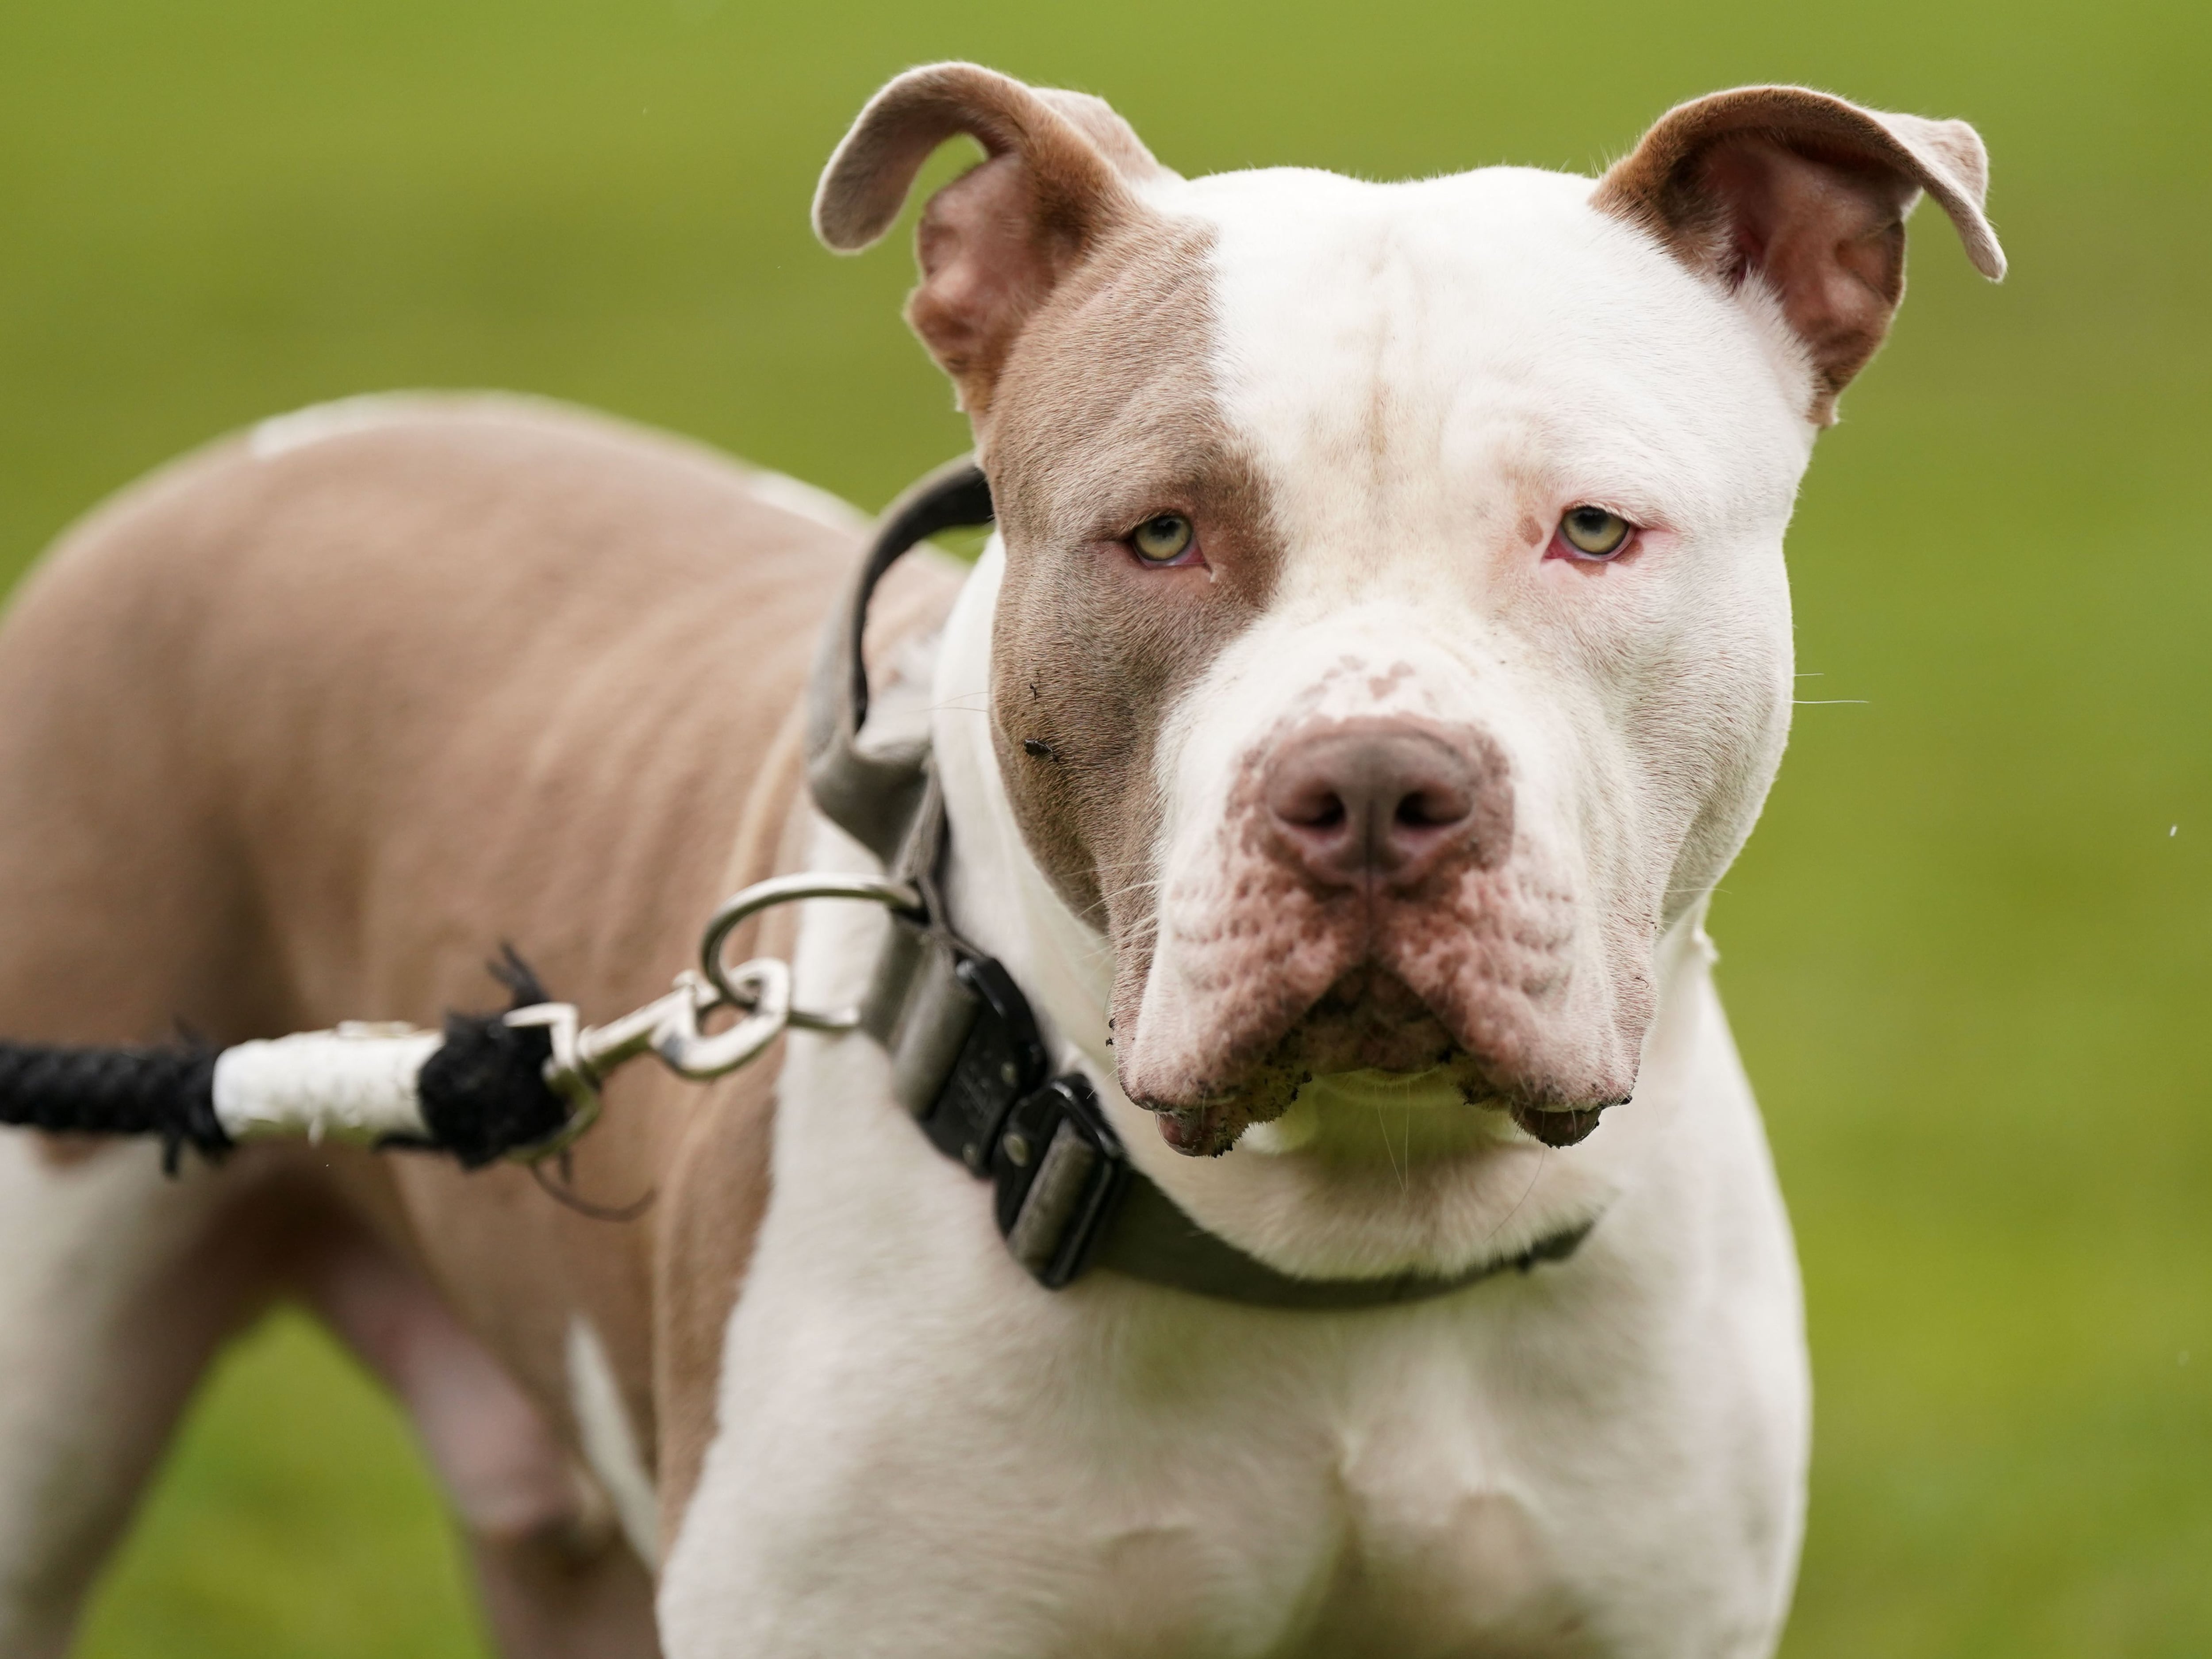 Owner of XL Bully named Karma warned dog could be destroyed unless she sticks to strict rules